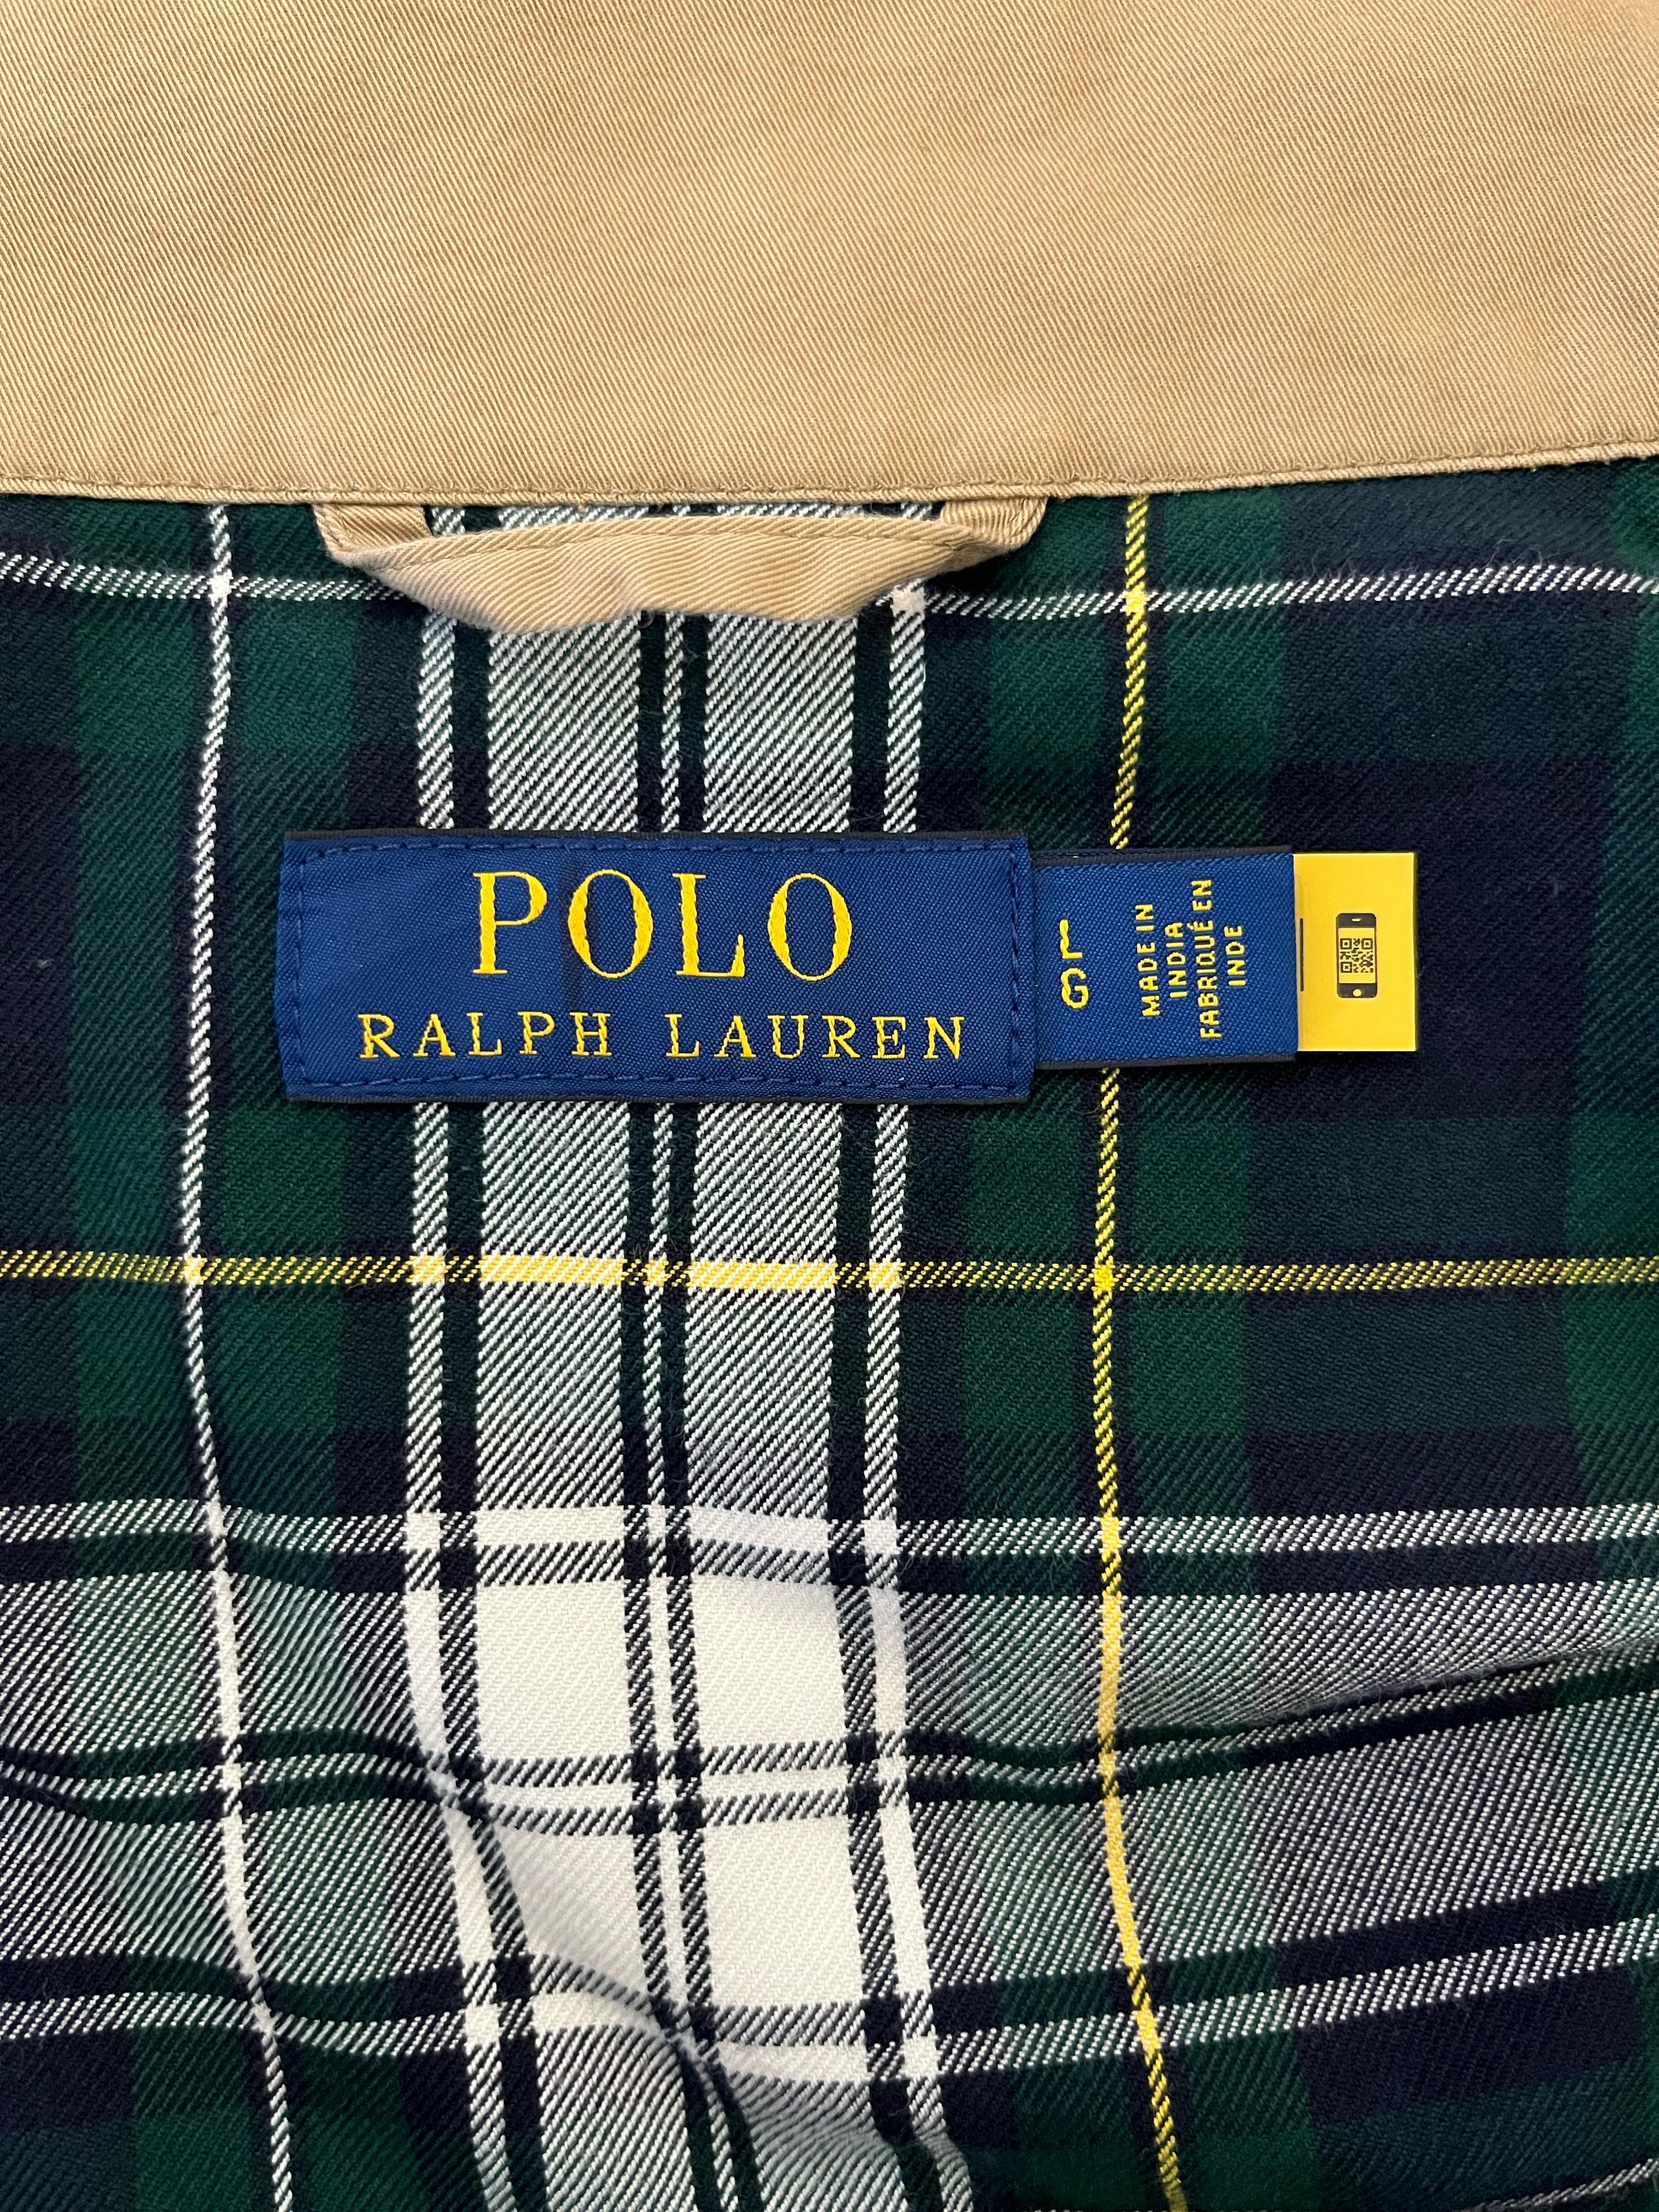 Polo Ralph Lauren Cotton Twill Jacket For Sale 4